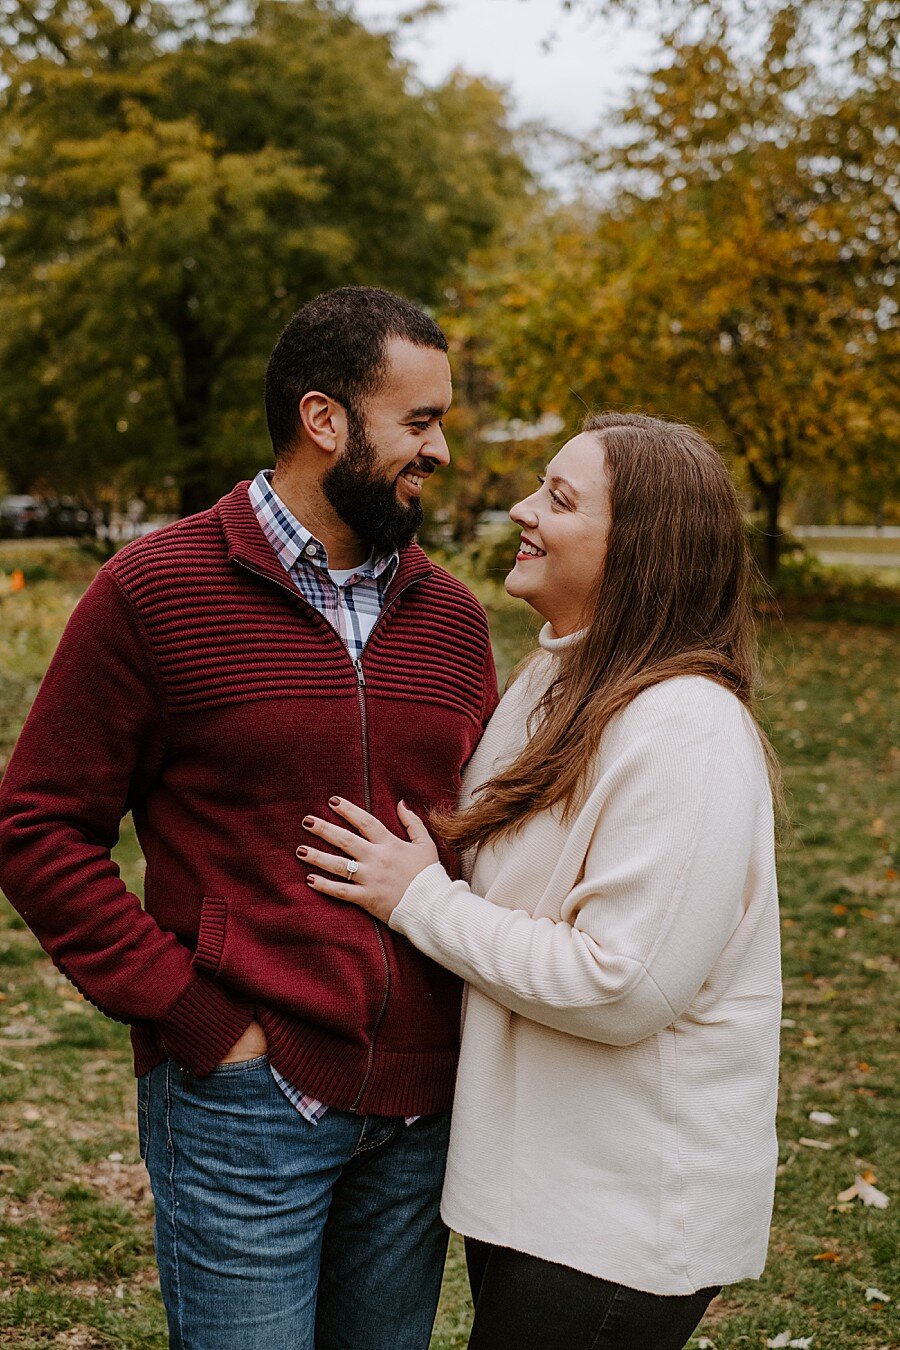 chicago engagement photographer, fall engagement photos, chicago engagement photos, Illinois wedding photographer, Chicago wedding photographer